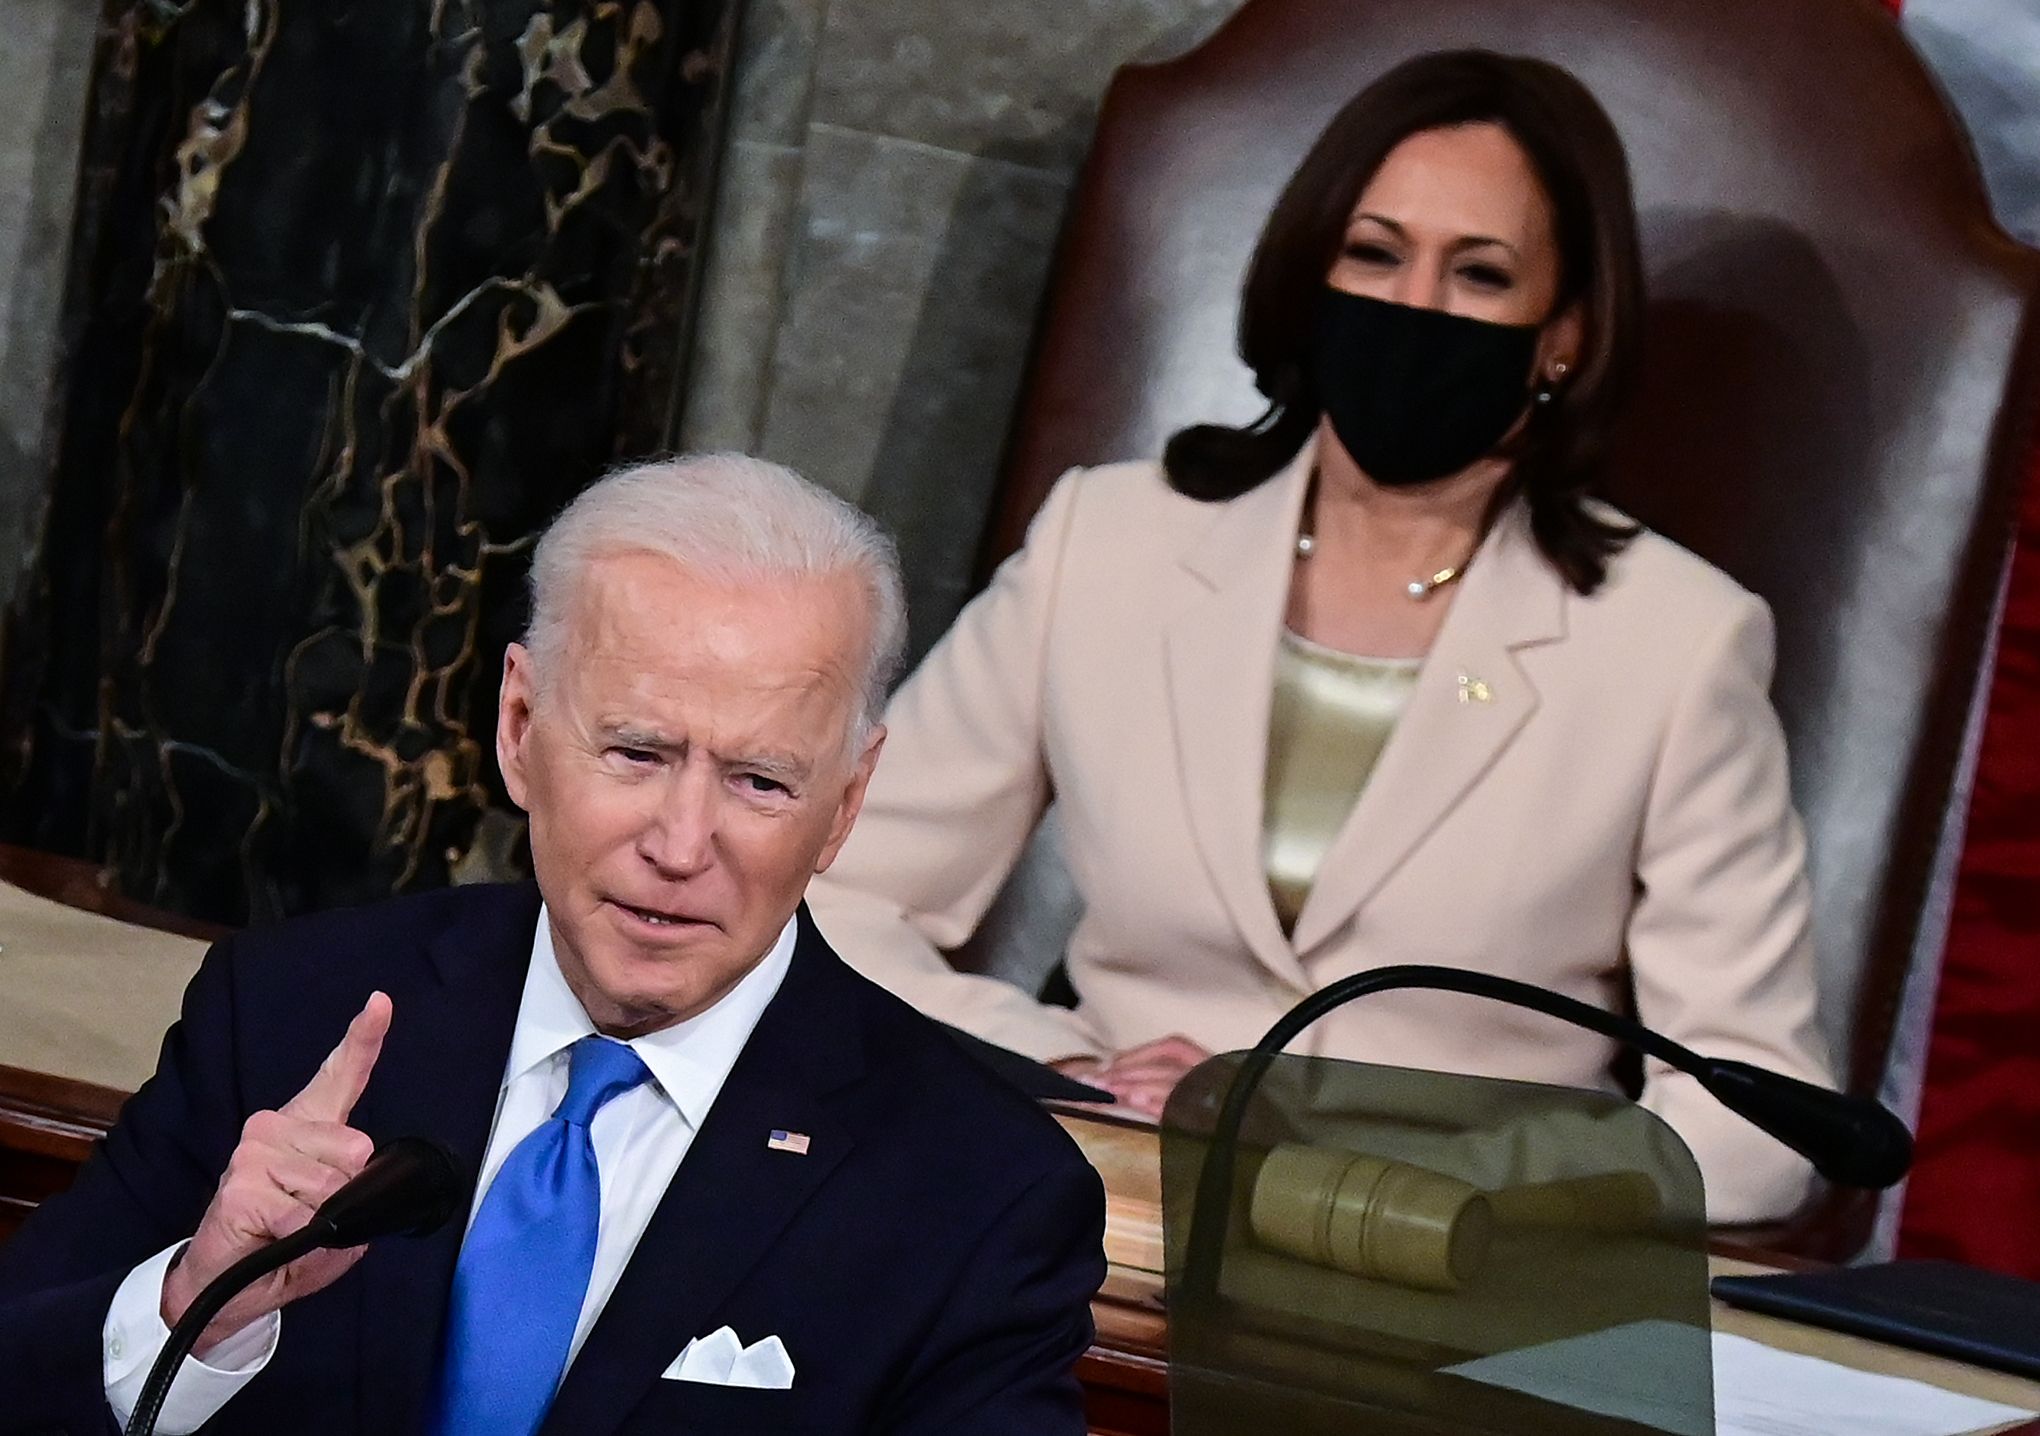 President Joe Biden addresses a joint session of congress as Vice President Kamala Harris looks on in the House chamber of the U.S. Capitol on April 28, 2021 in Washington, DC.